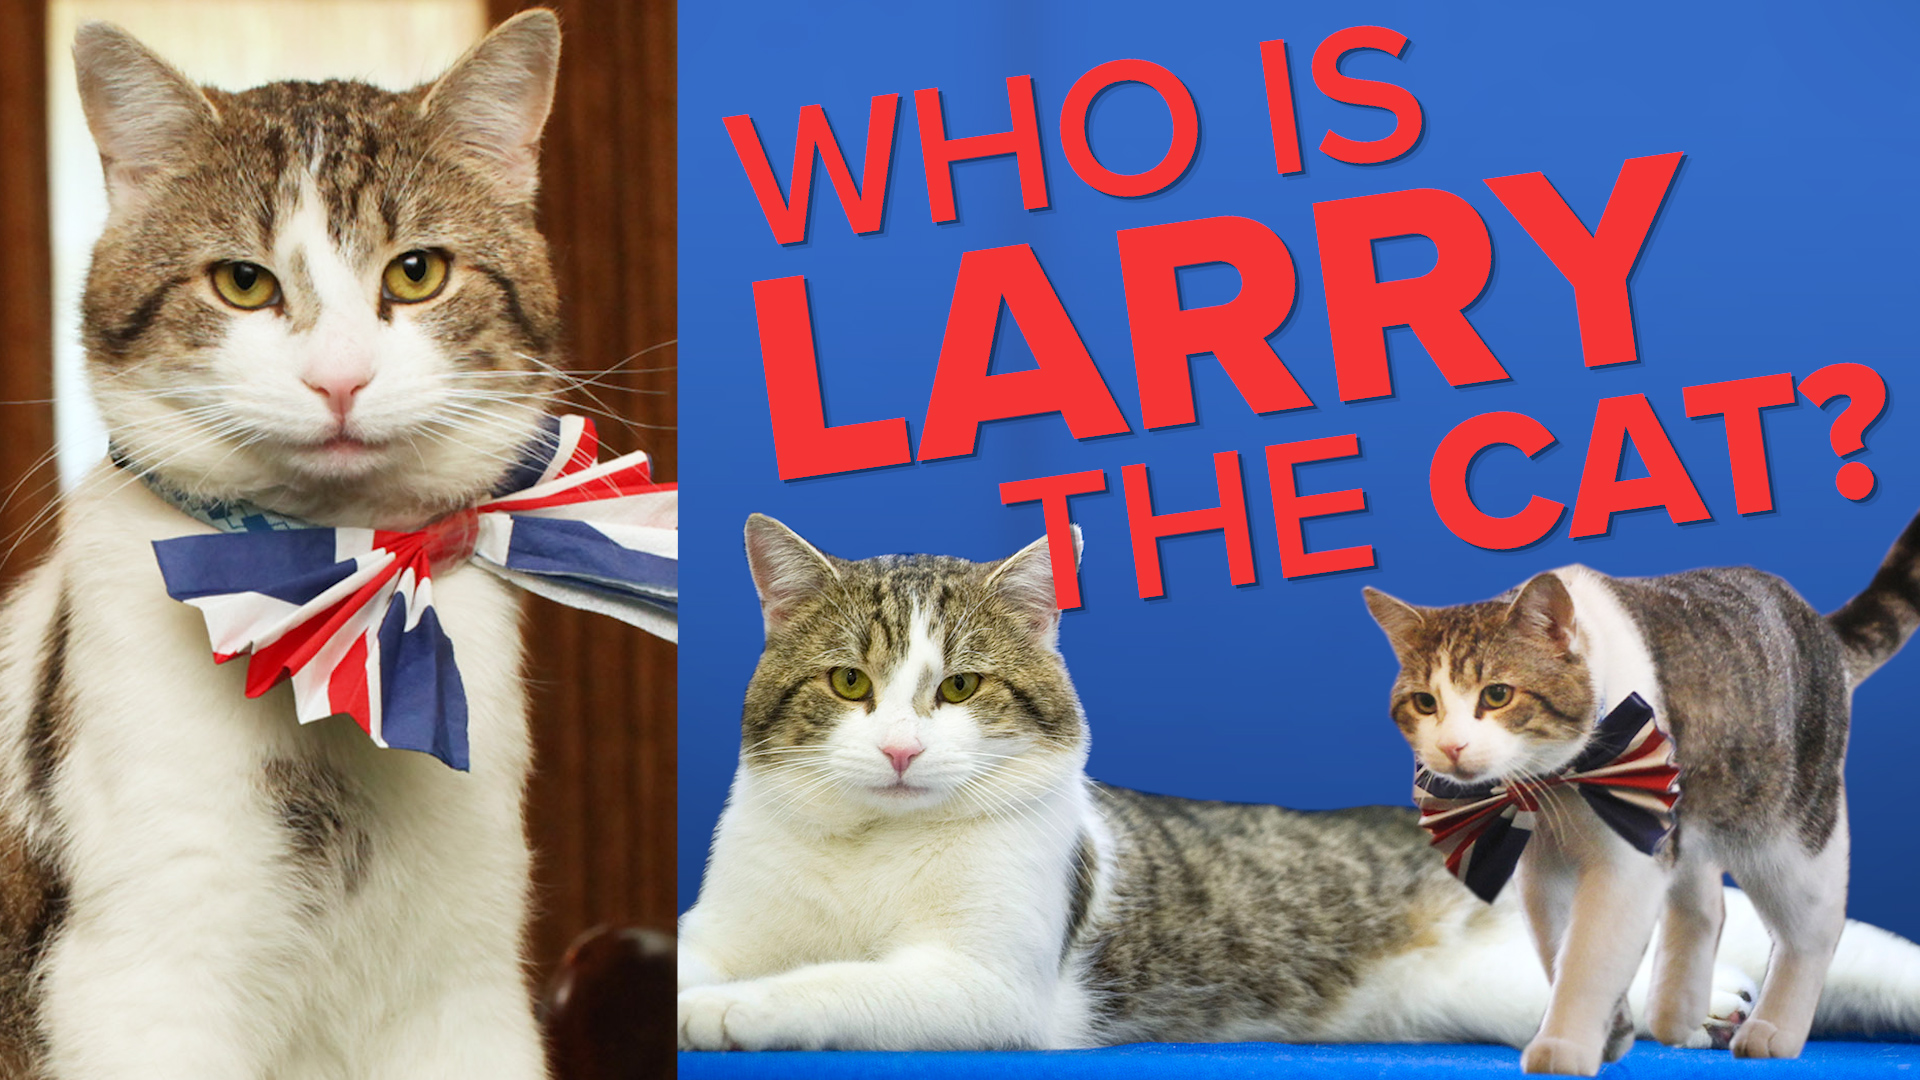 Larry the cat Who is the UK Prime Minister’s Chief Mouser to the